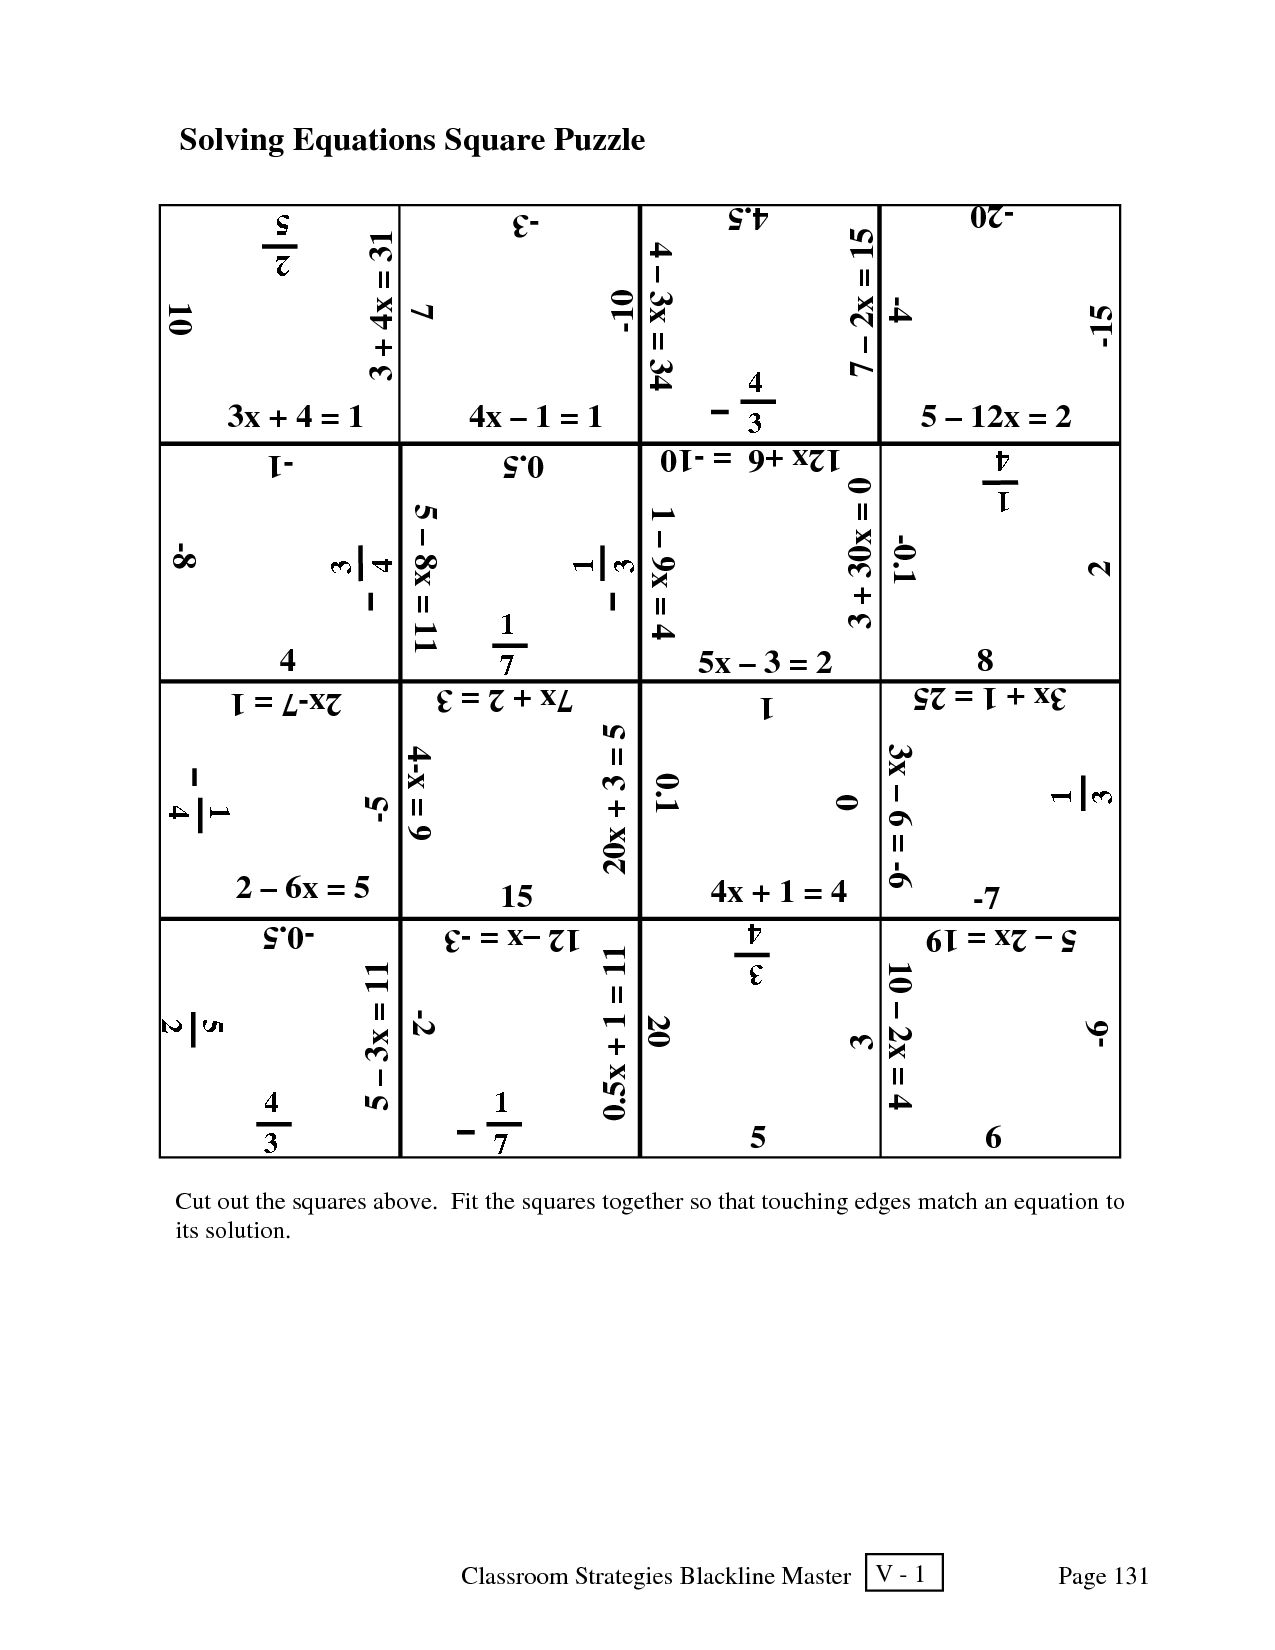 Pictures Solving Equations Puzzle Worksheet - Leafsea